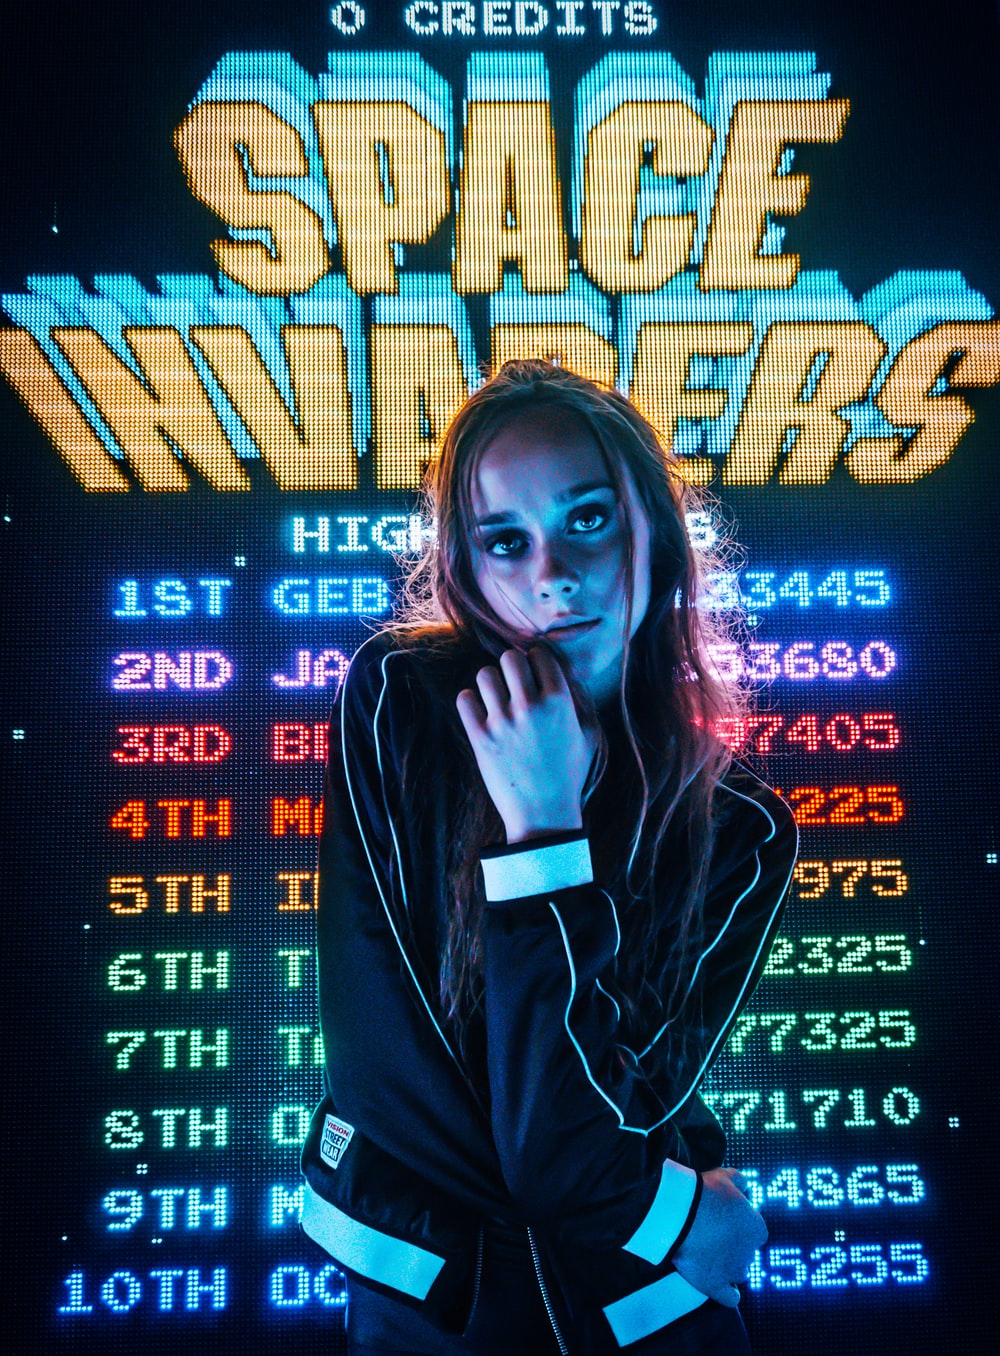 Space Invaders Backgrounds